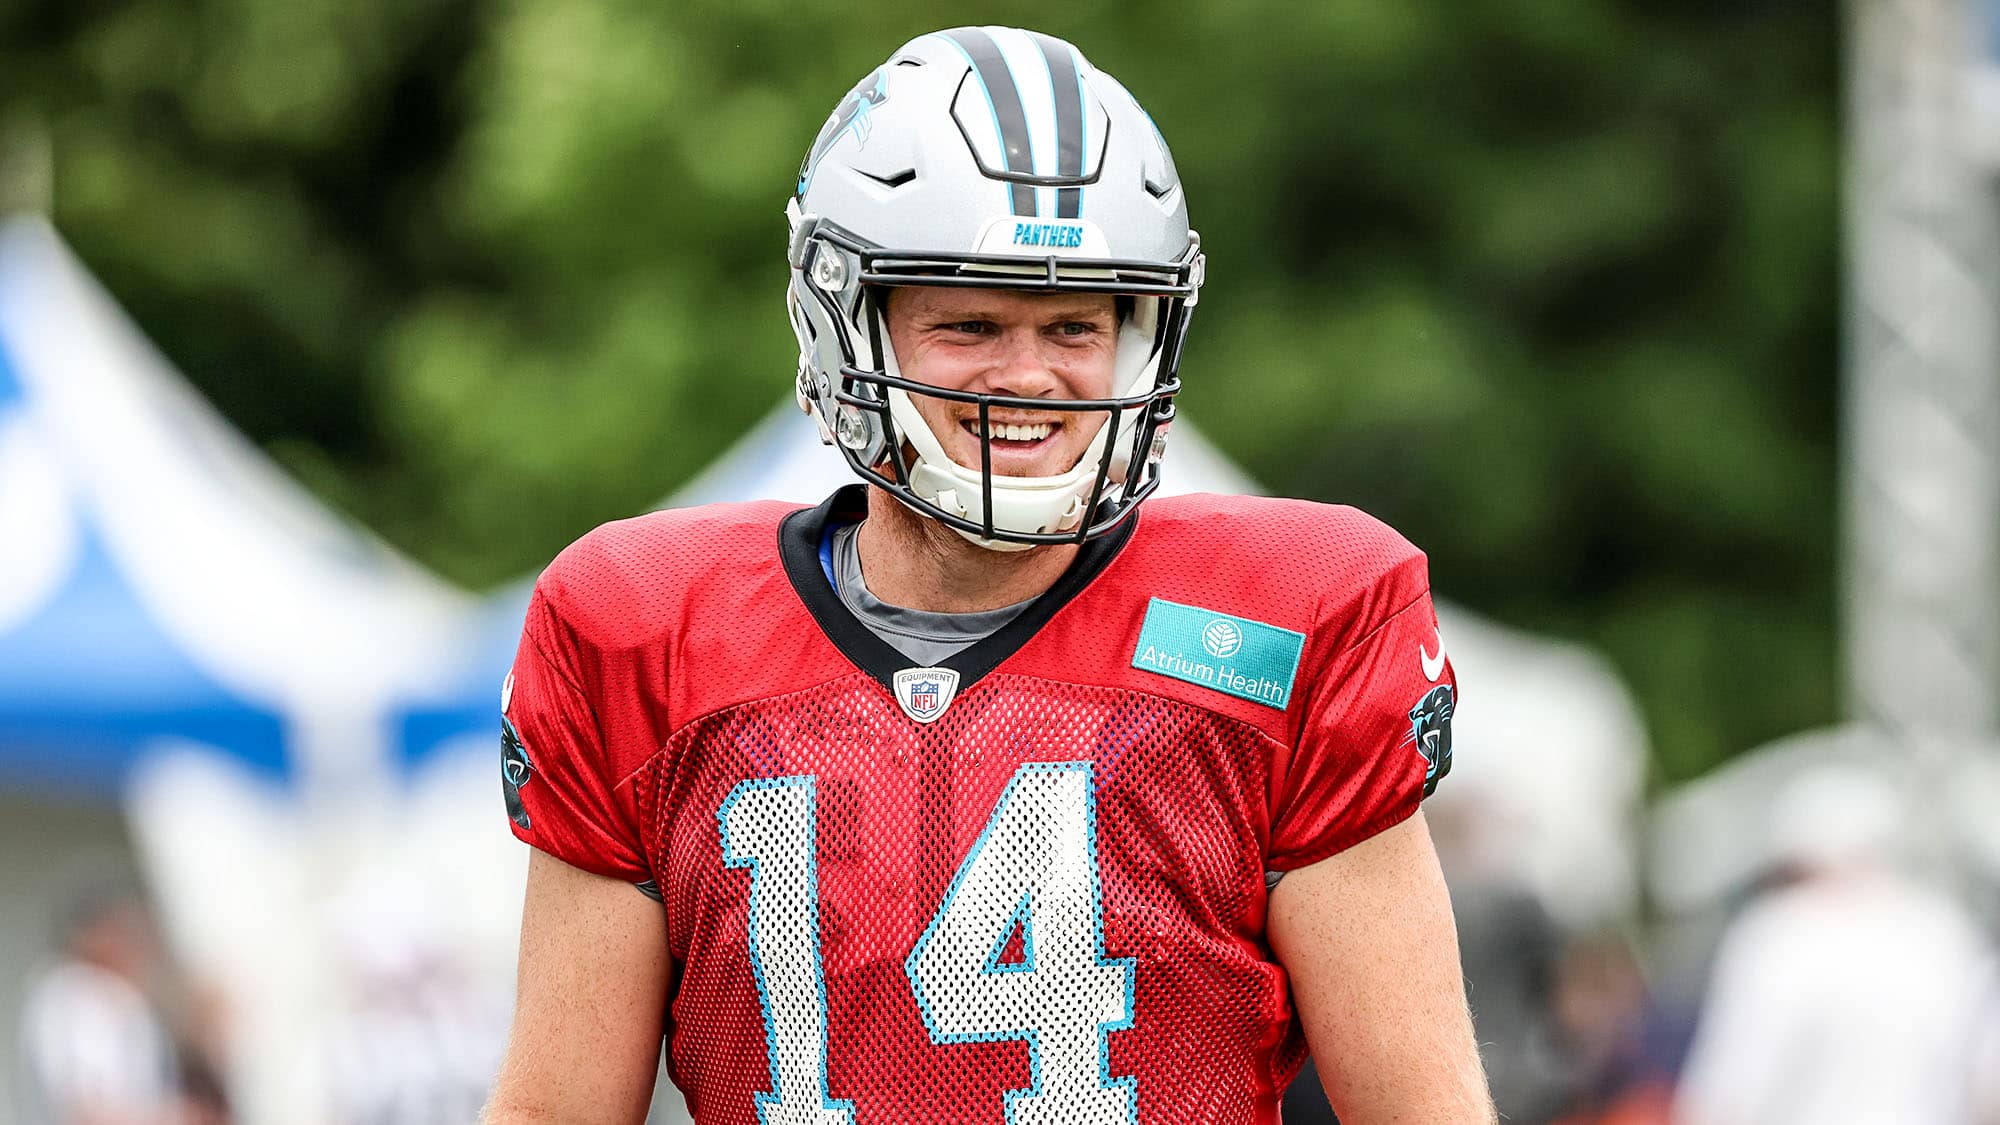 Carolina Panthers QB Sam Darnold joked about the New York Jets offensive line.